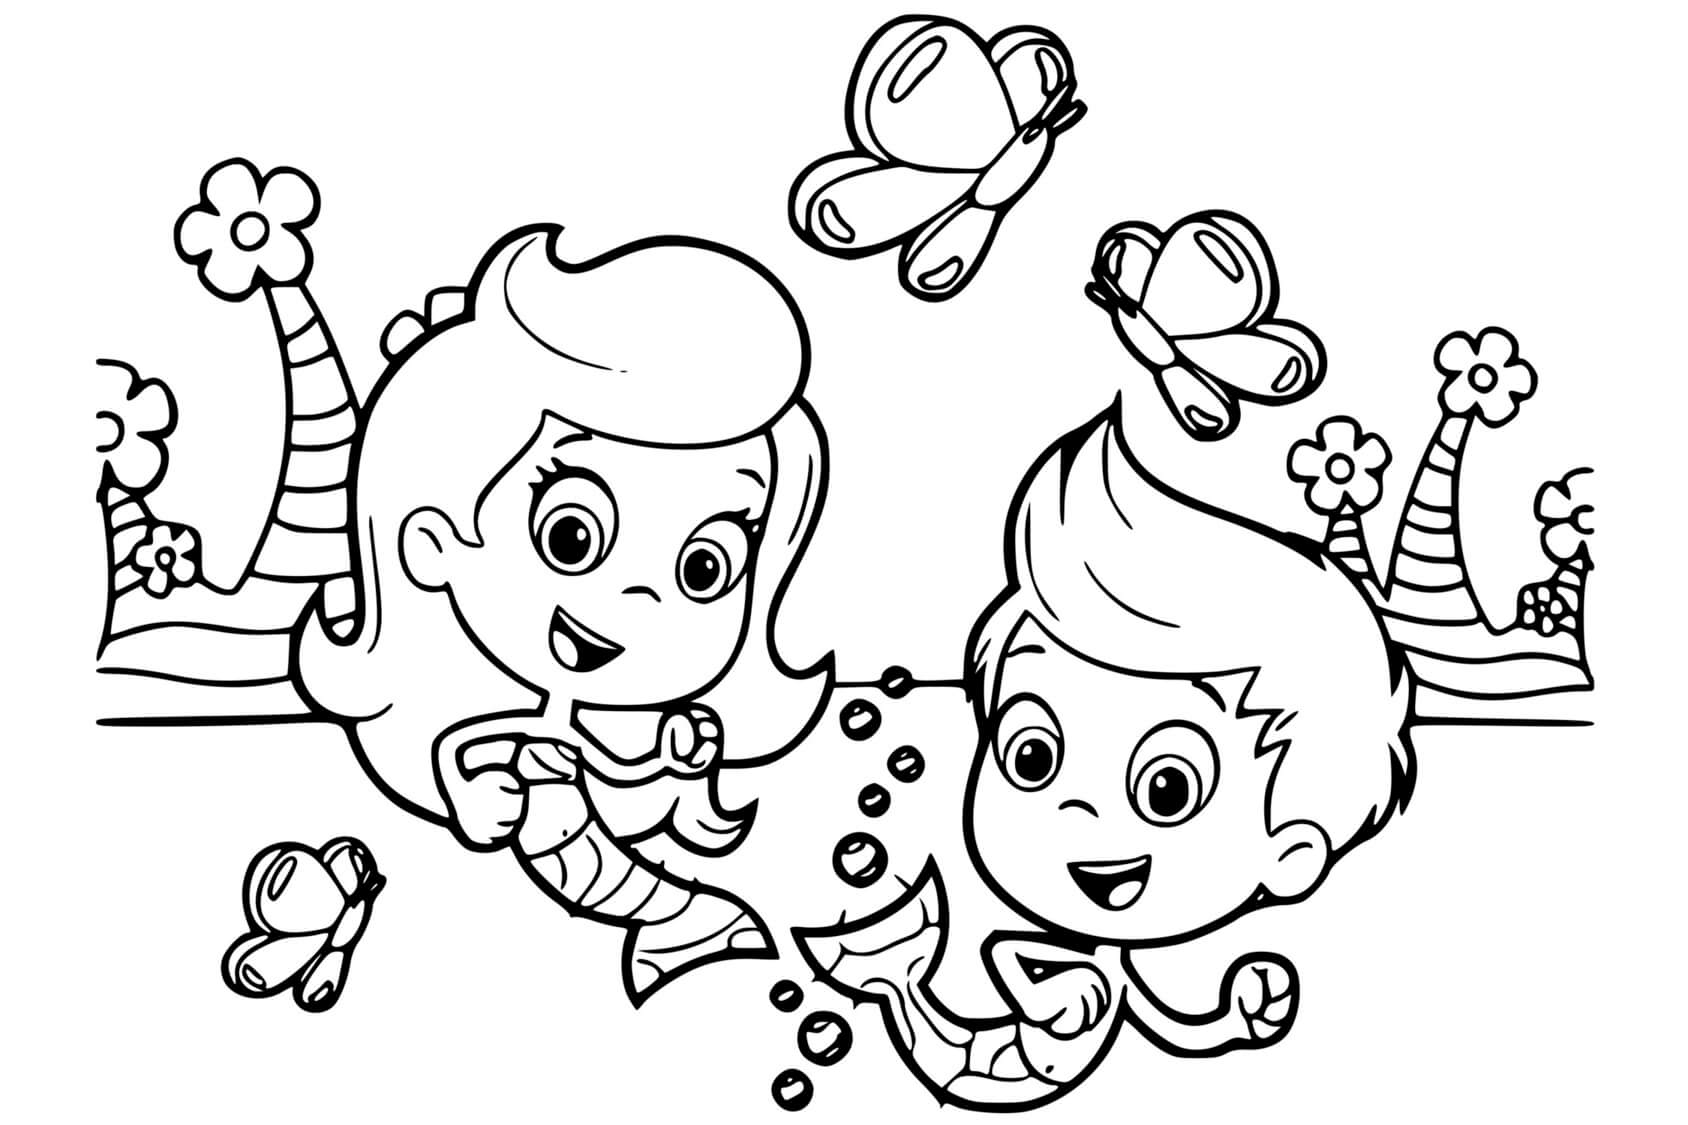 Gil Molly Bubble Guppies Coloring Page